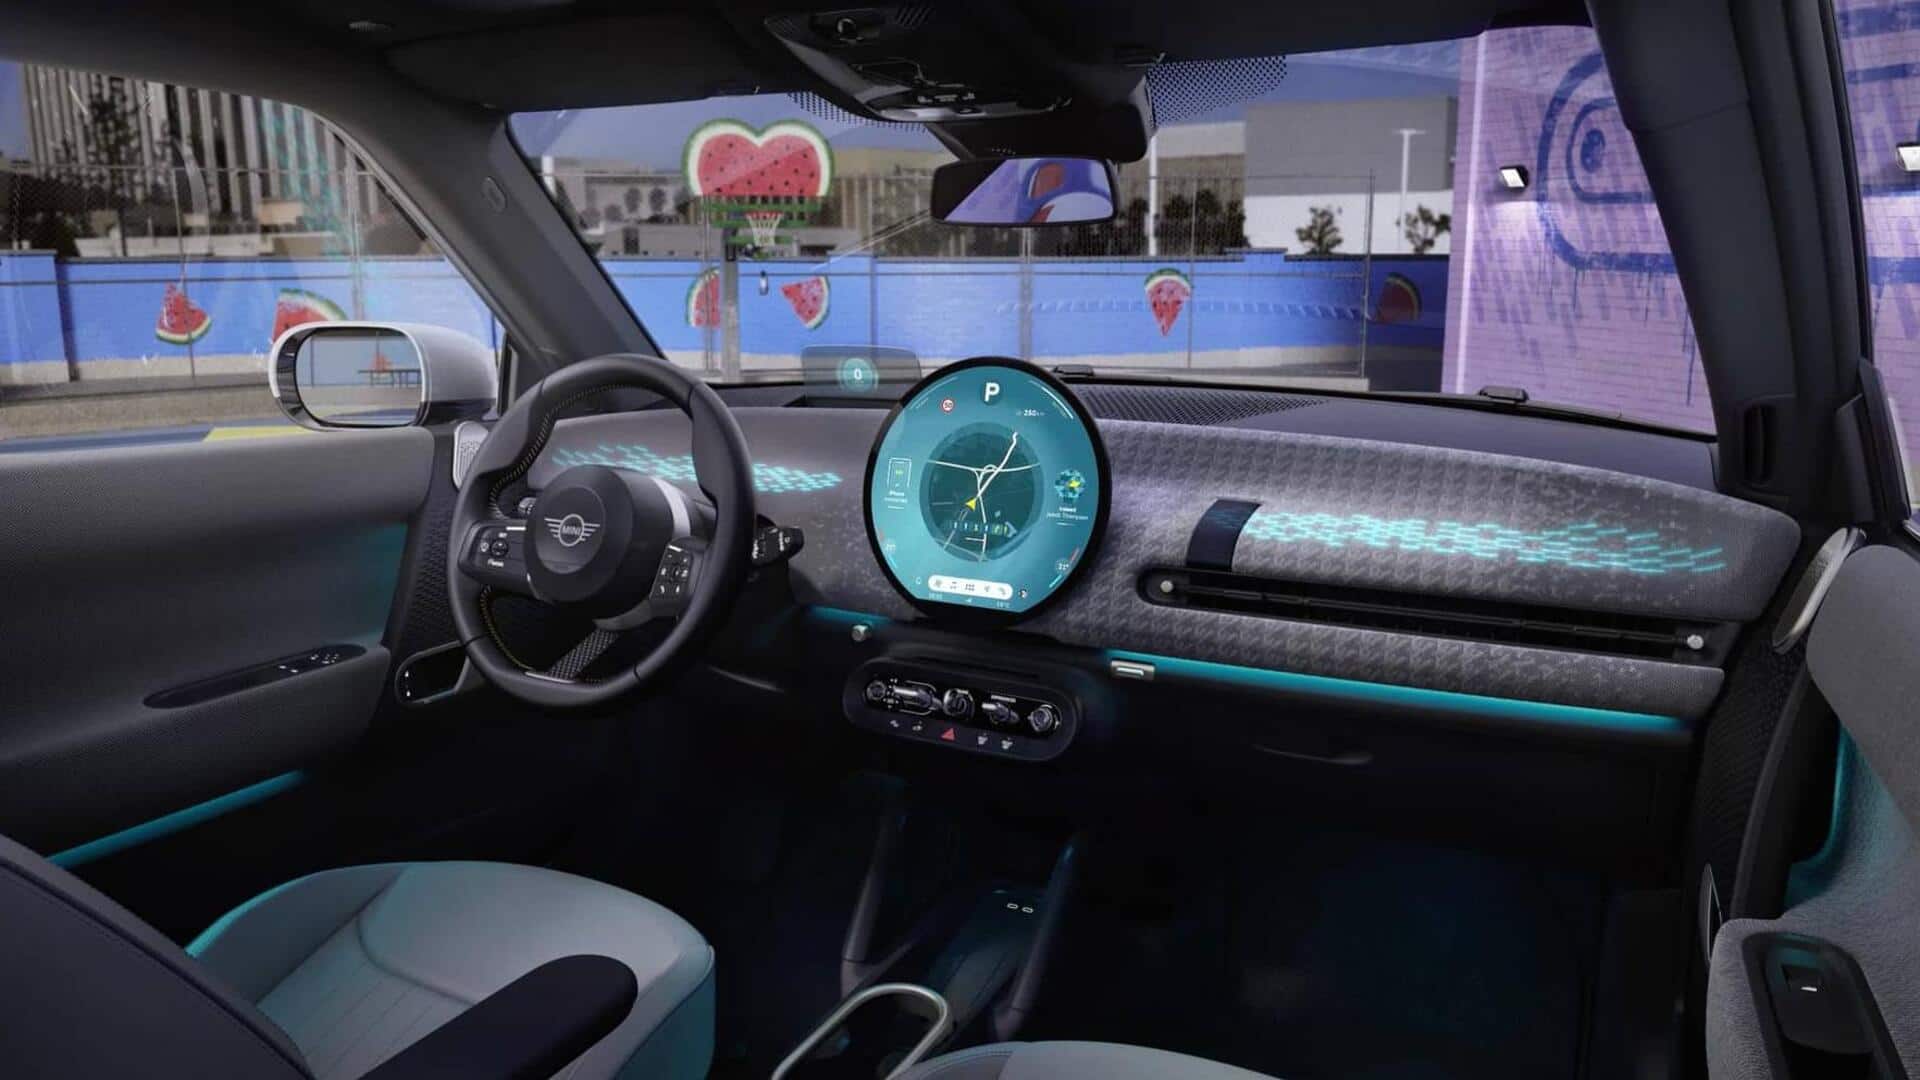 2025 MINI Cooper's cabin looks straight out of sci-fi movies